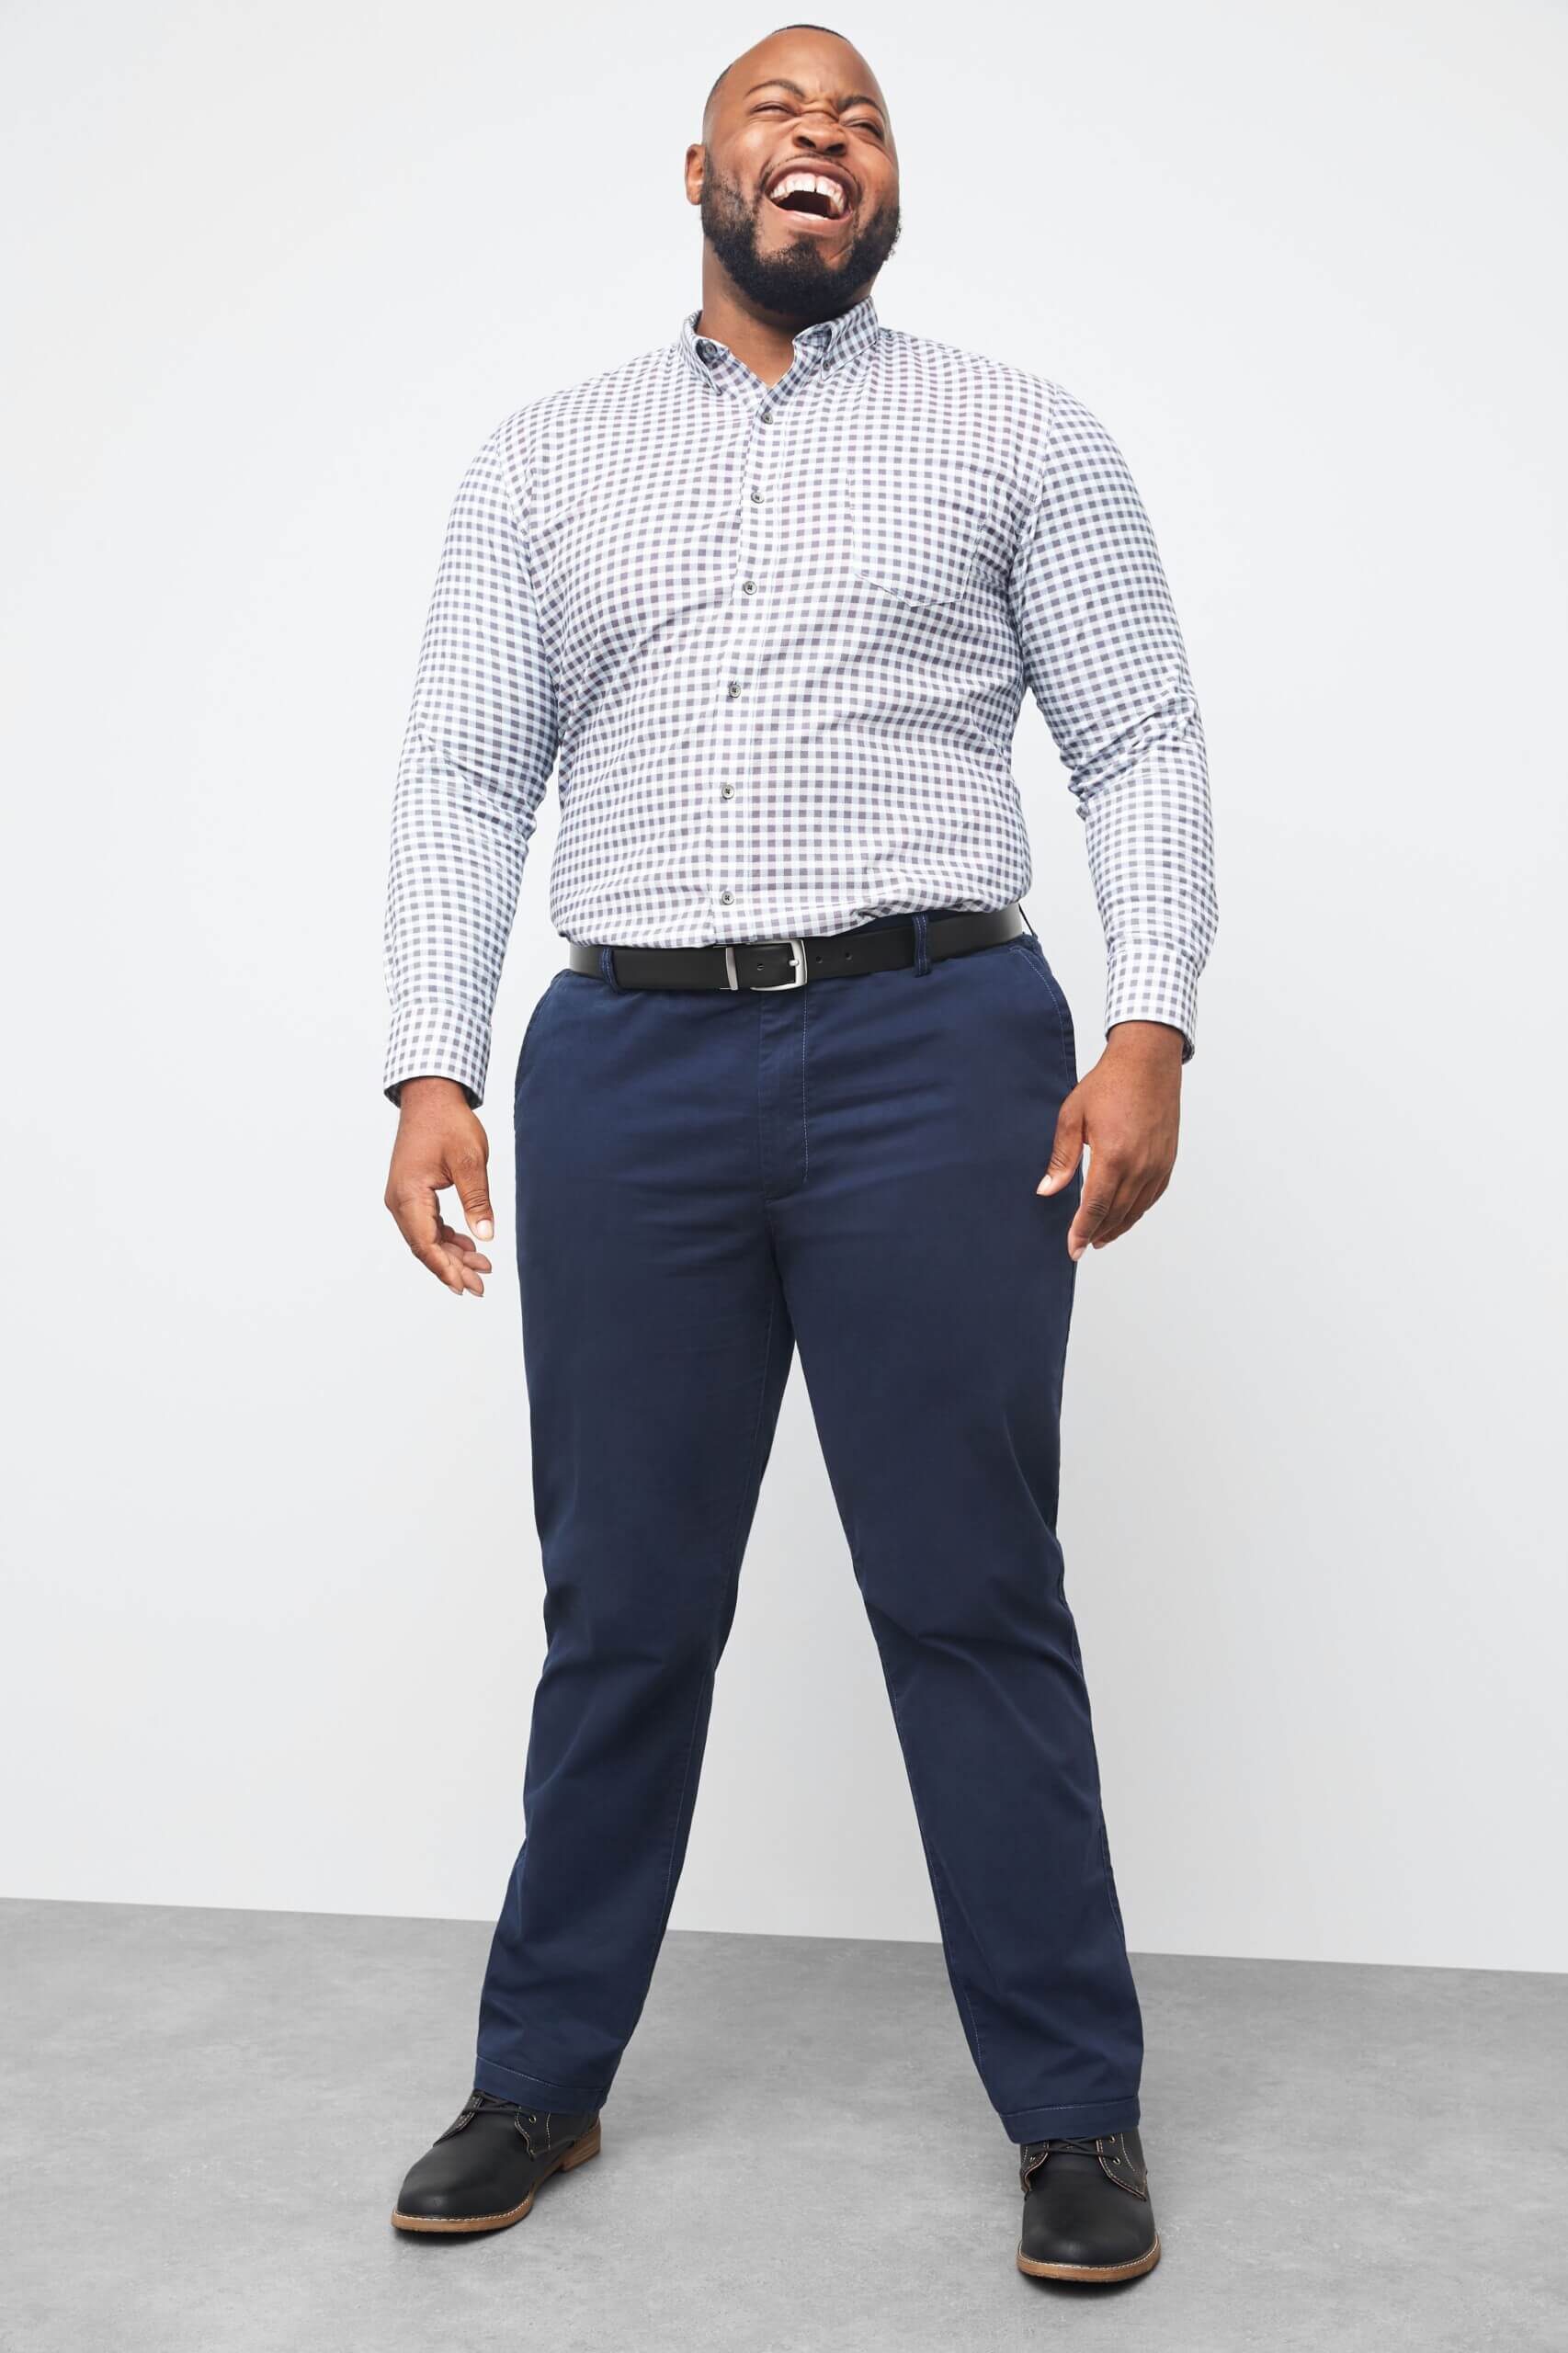 Big and Tall Men's Fashion Tips, The Men's Style Guide